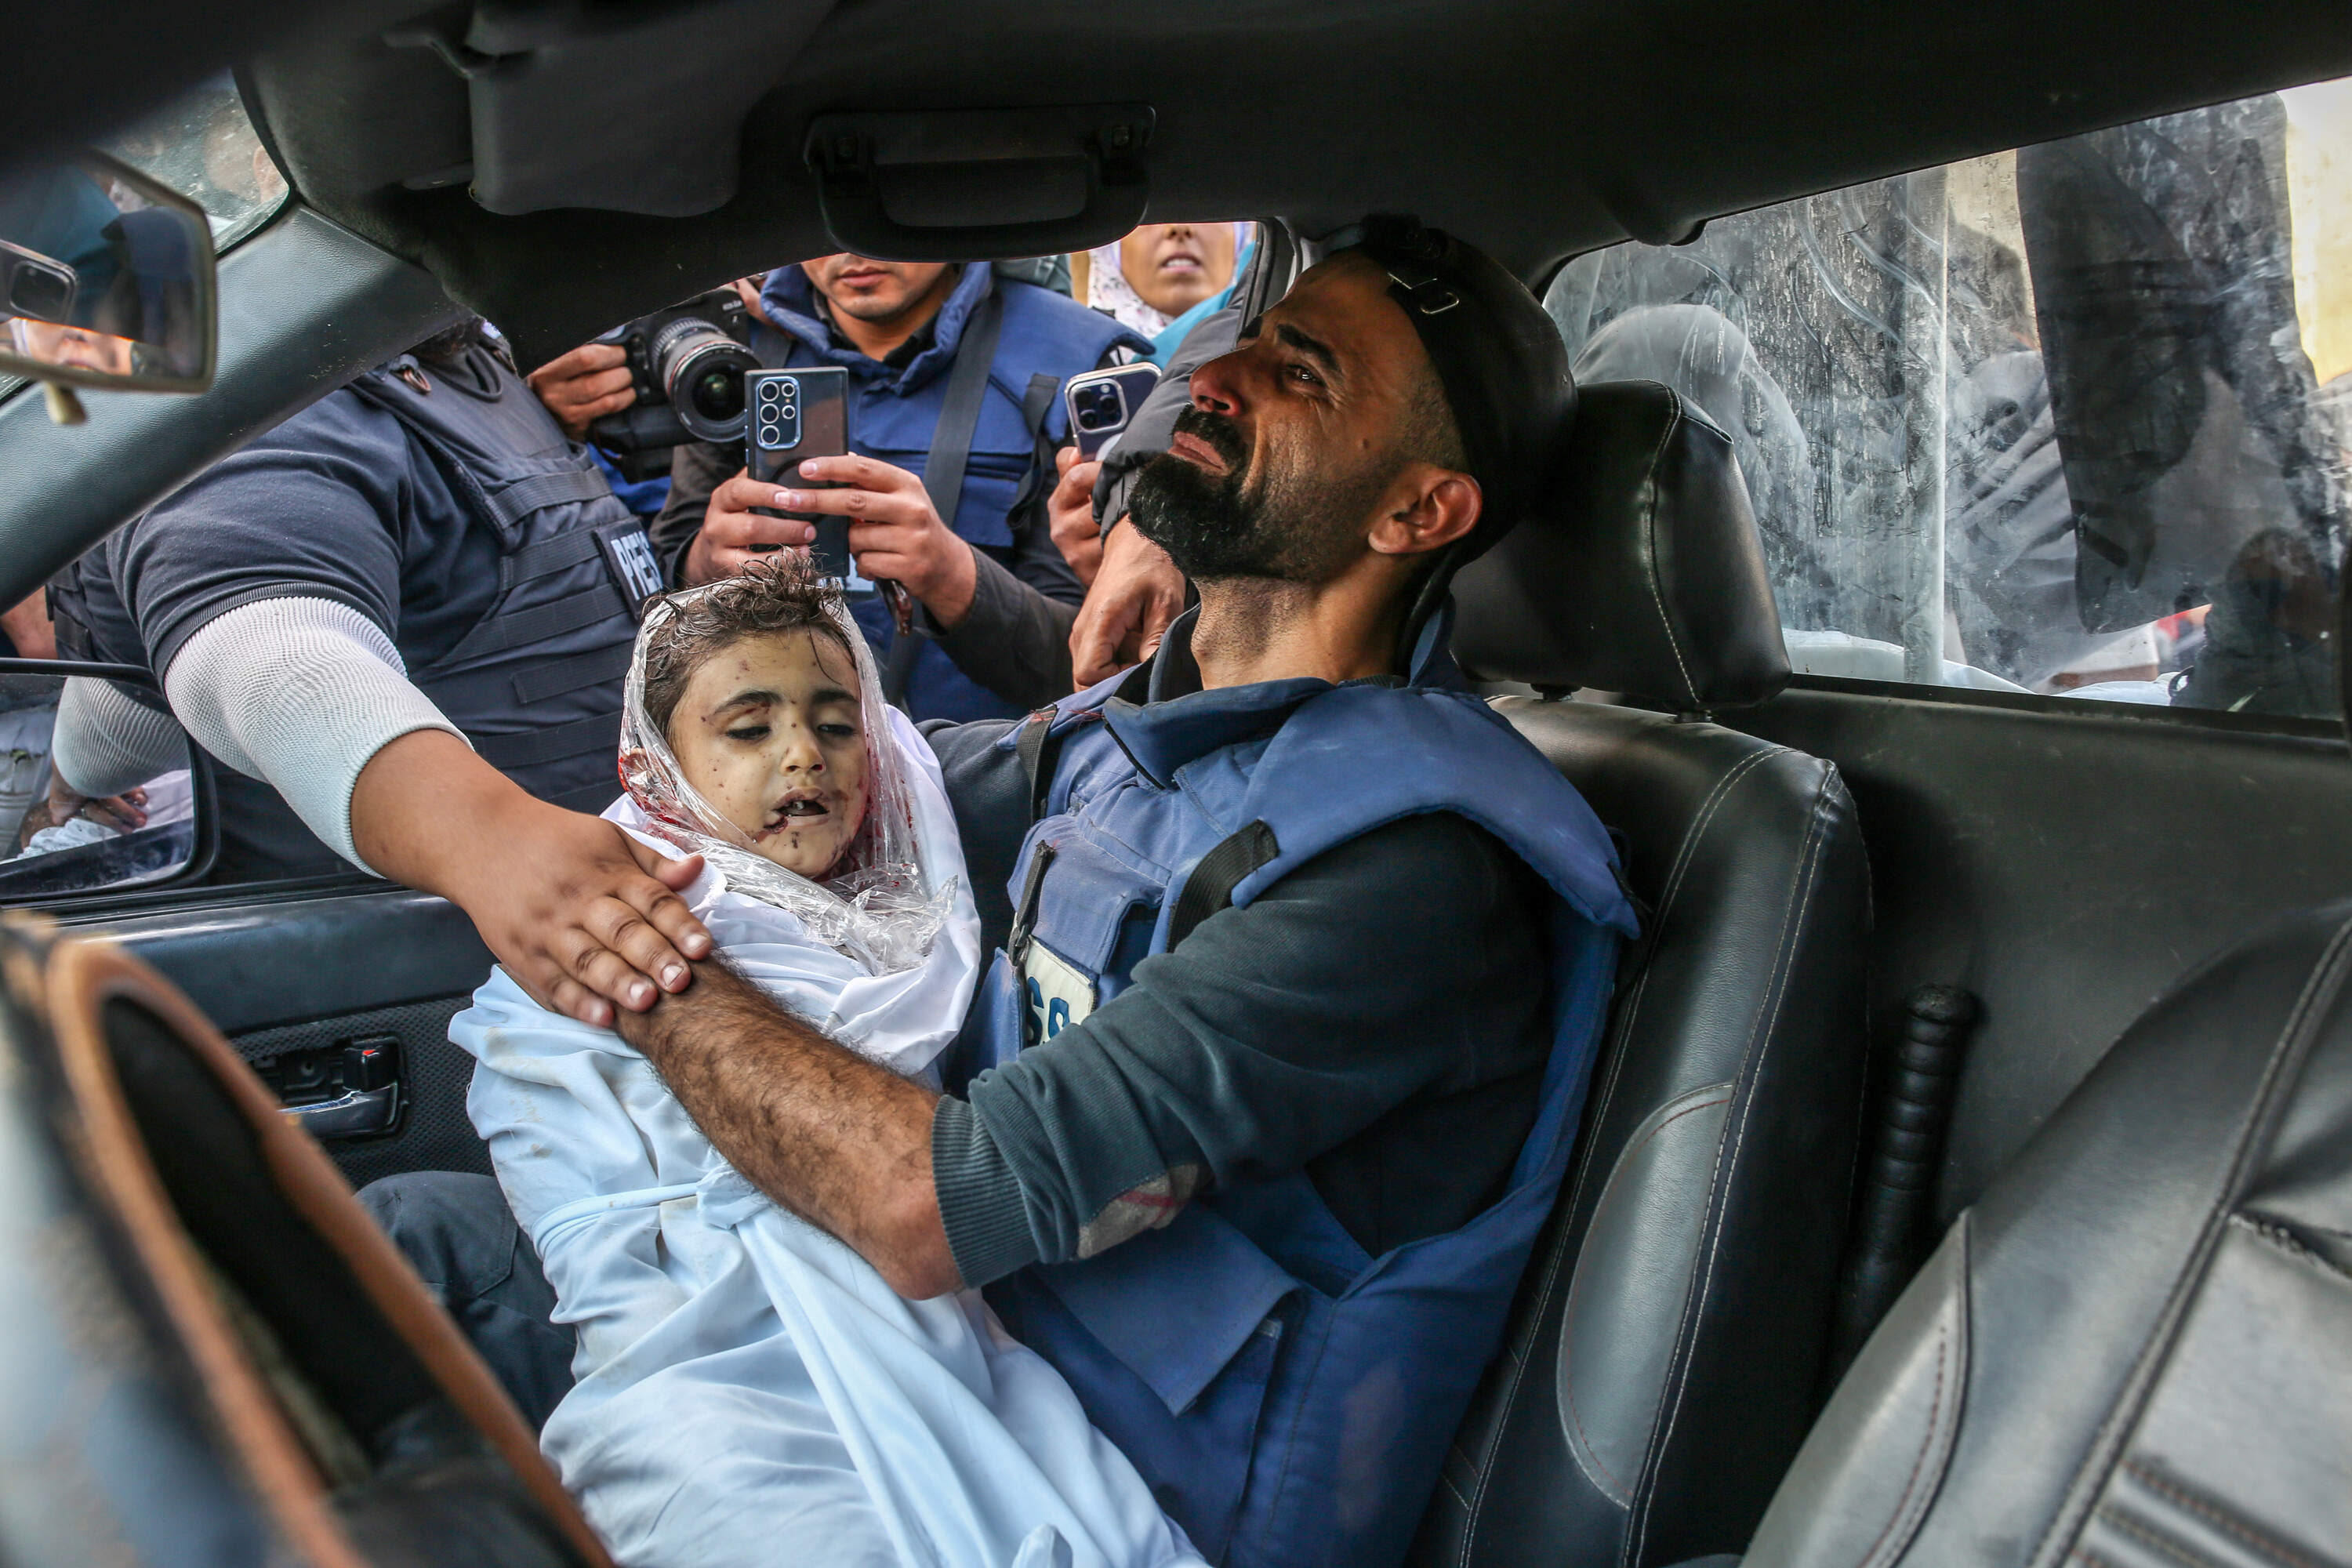 The photojournalist Mohammed al-Aloul holding the body of one of his children killed in the war. (Samar Abu Elouf/New York Times)